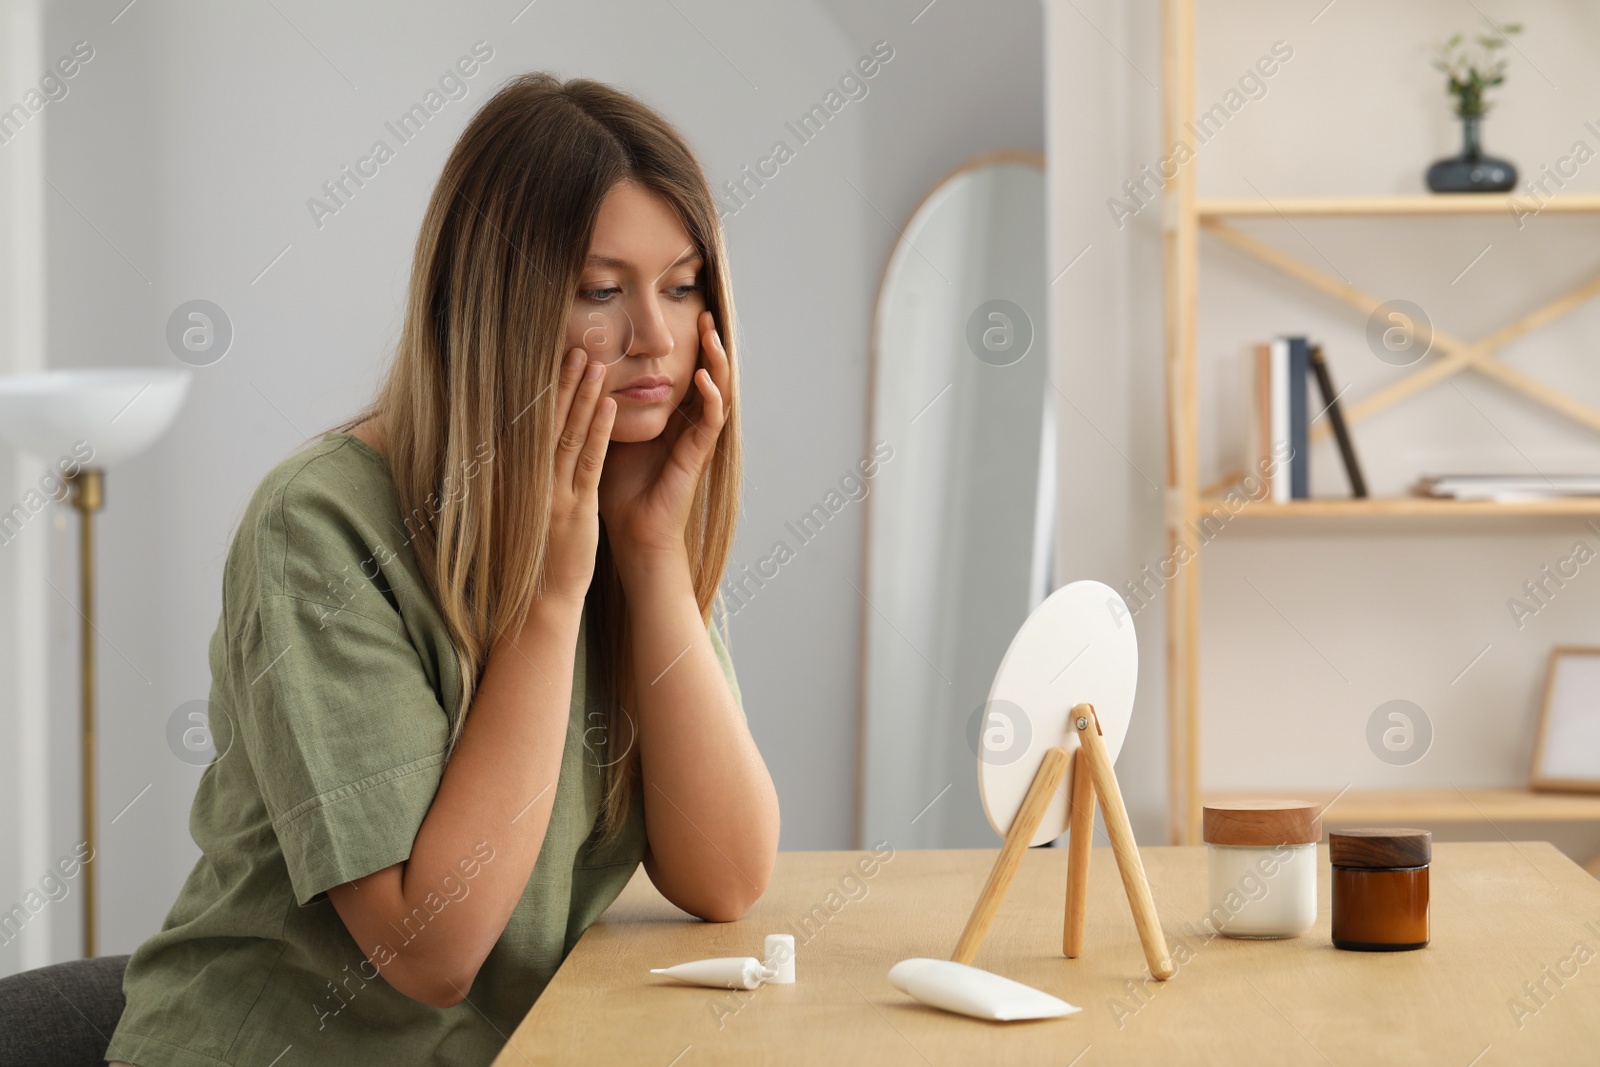 Photo of Sleep deprived young woman looking at herself in mirror indoors